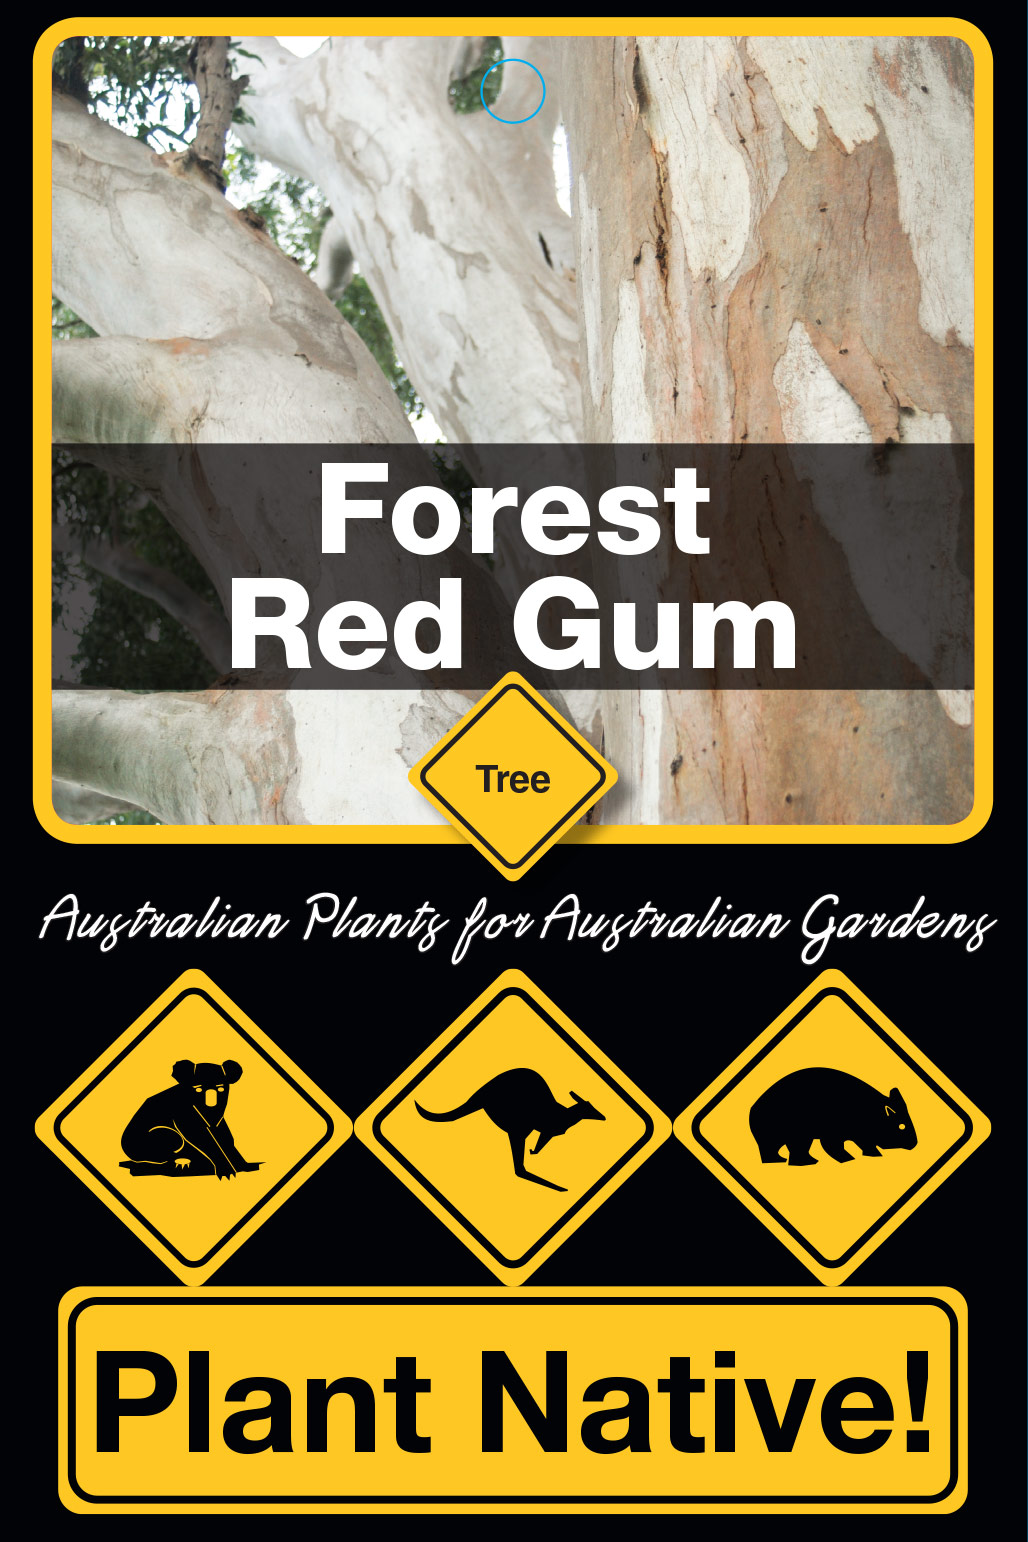 Forest Red Gum - Plant Native!